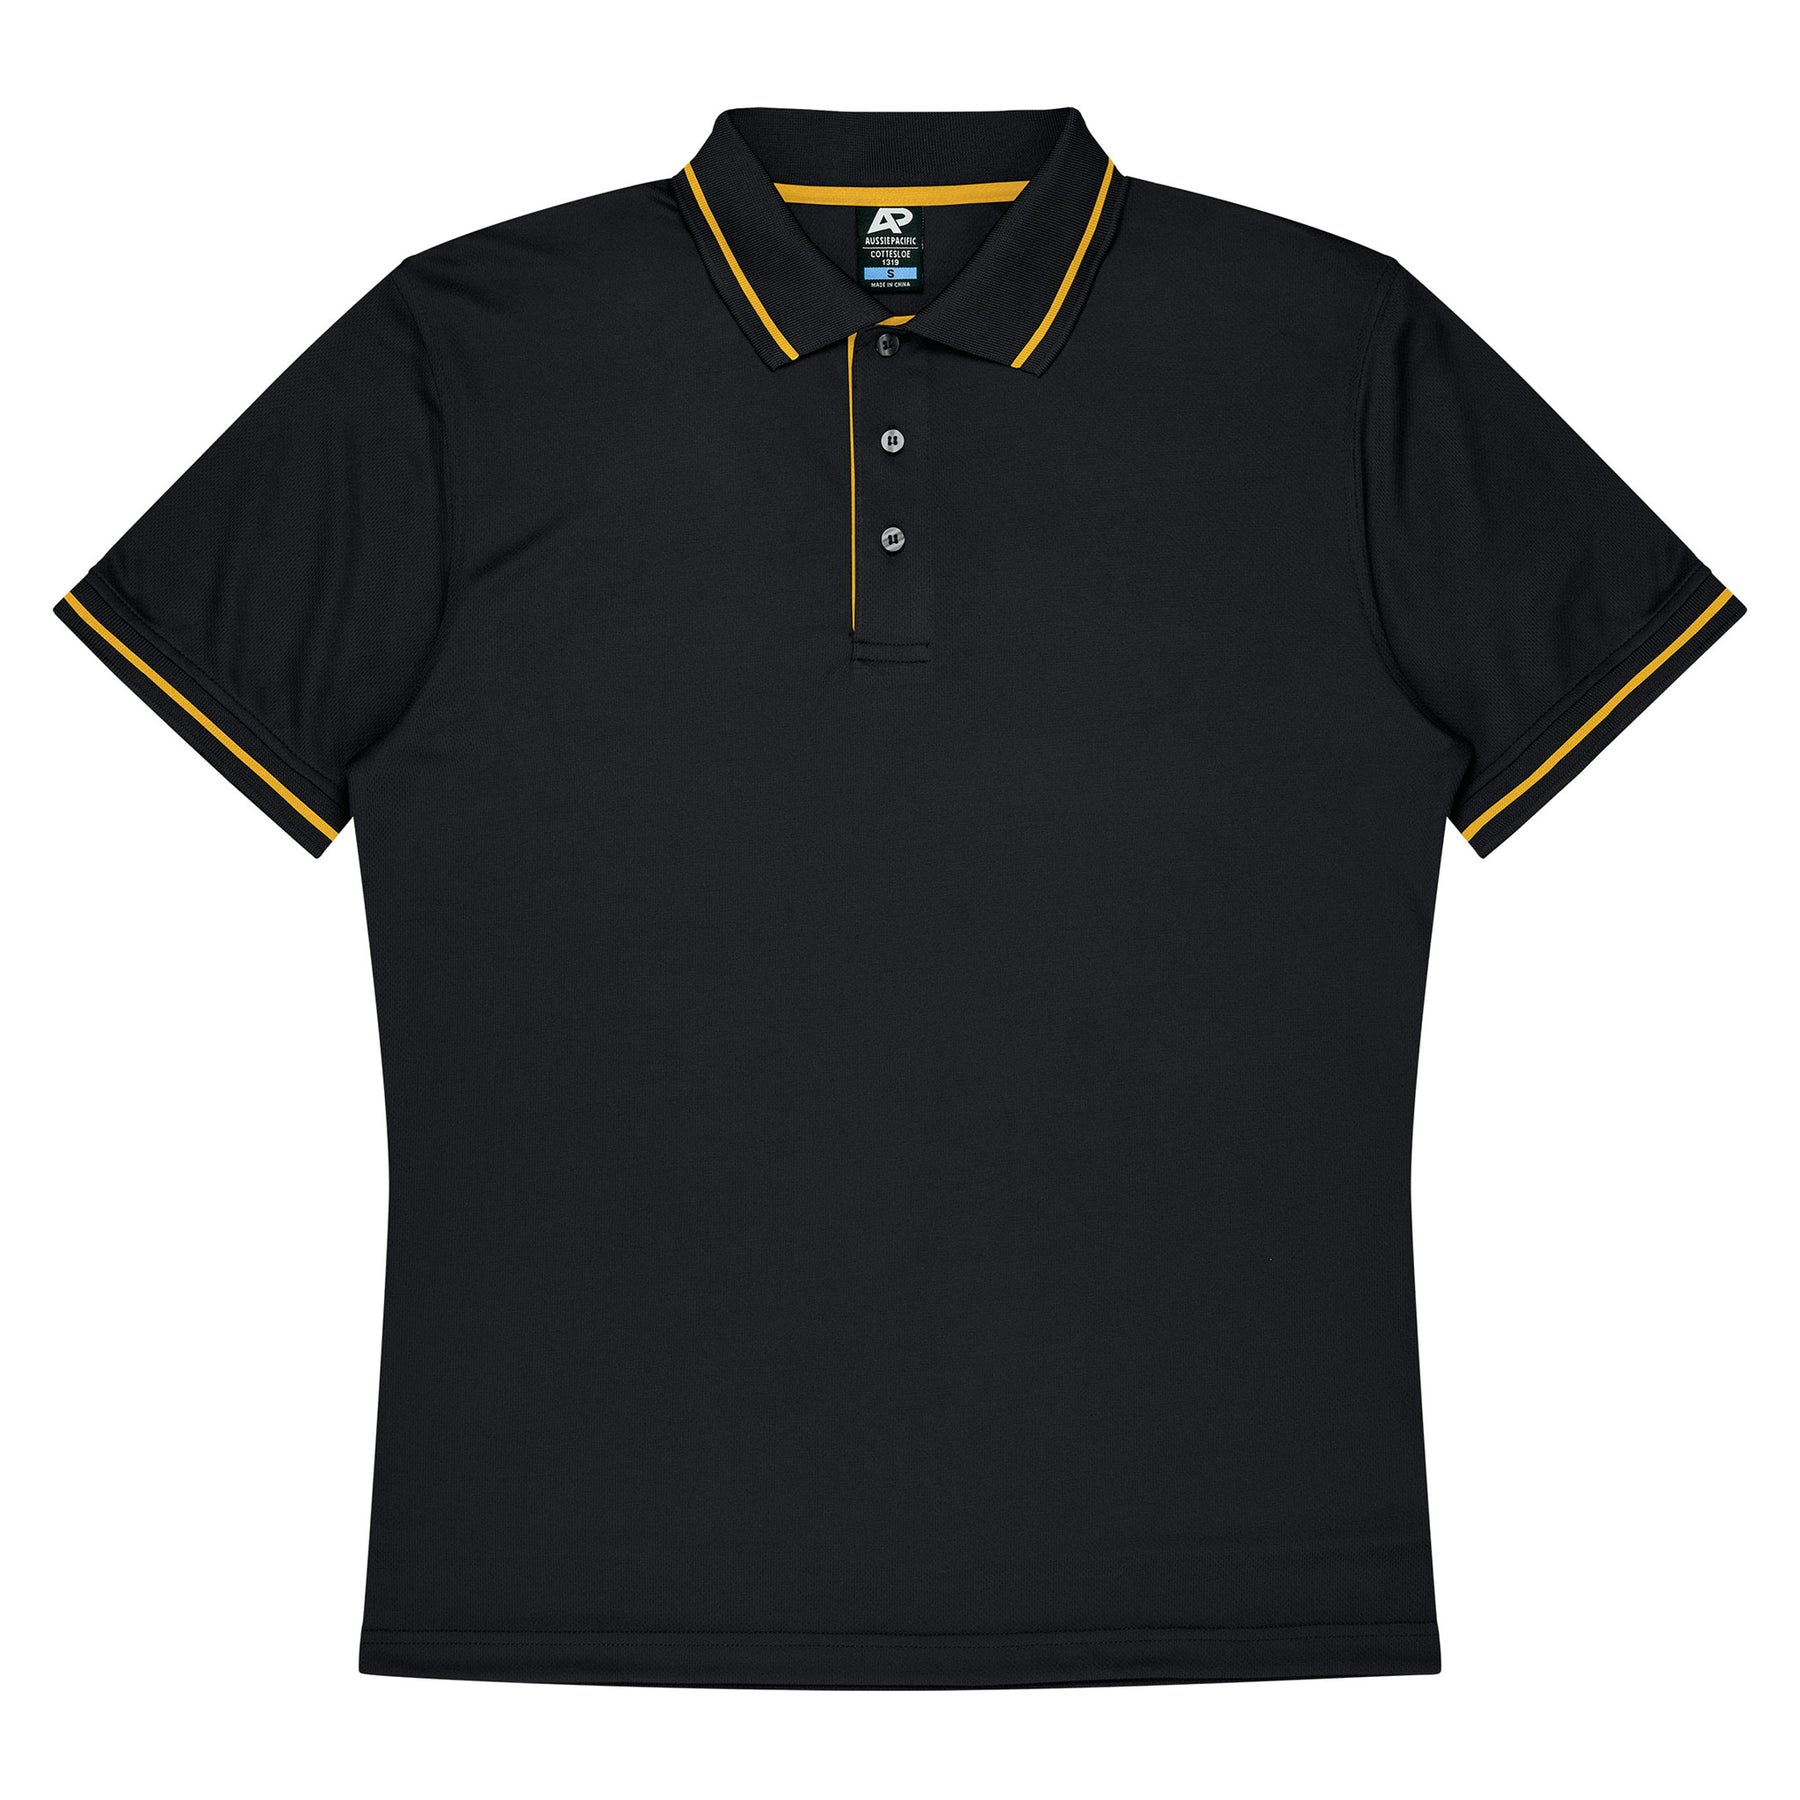 aussie pacific cottesloe mens polo in black gold